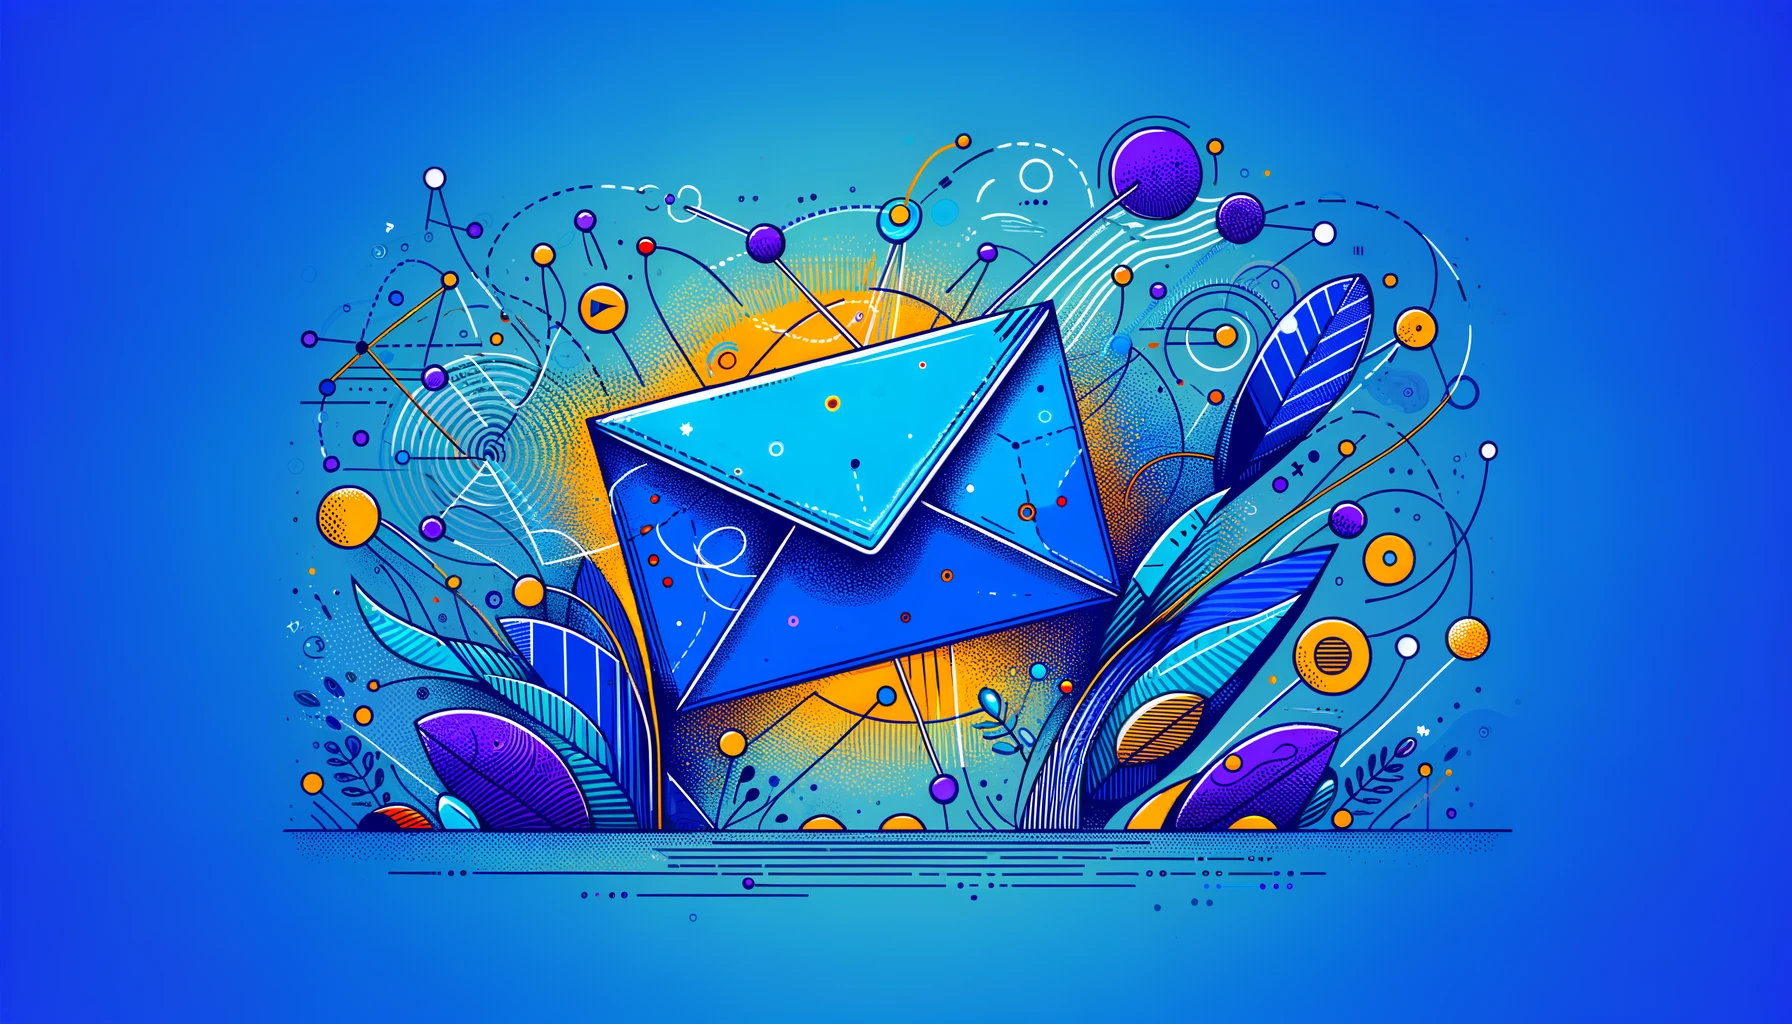 Email Marketing: Basics & How to Get Started